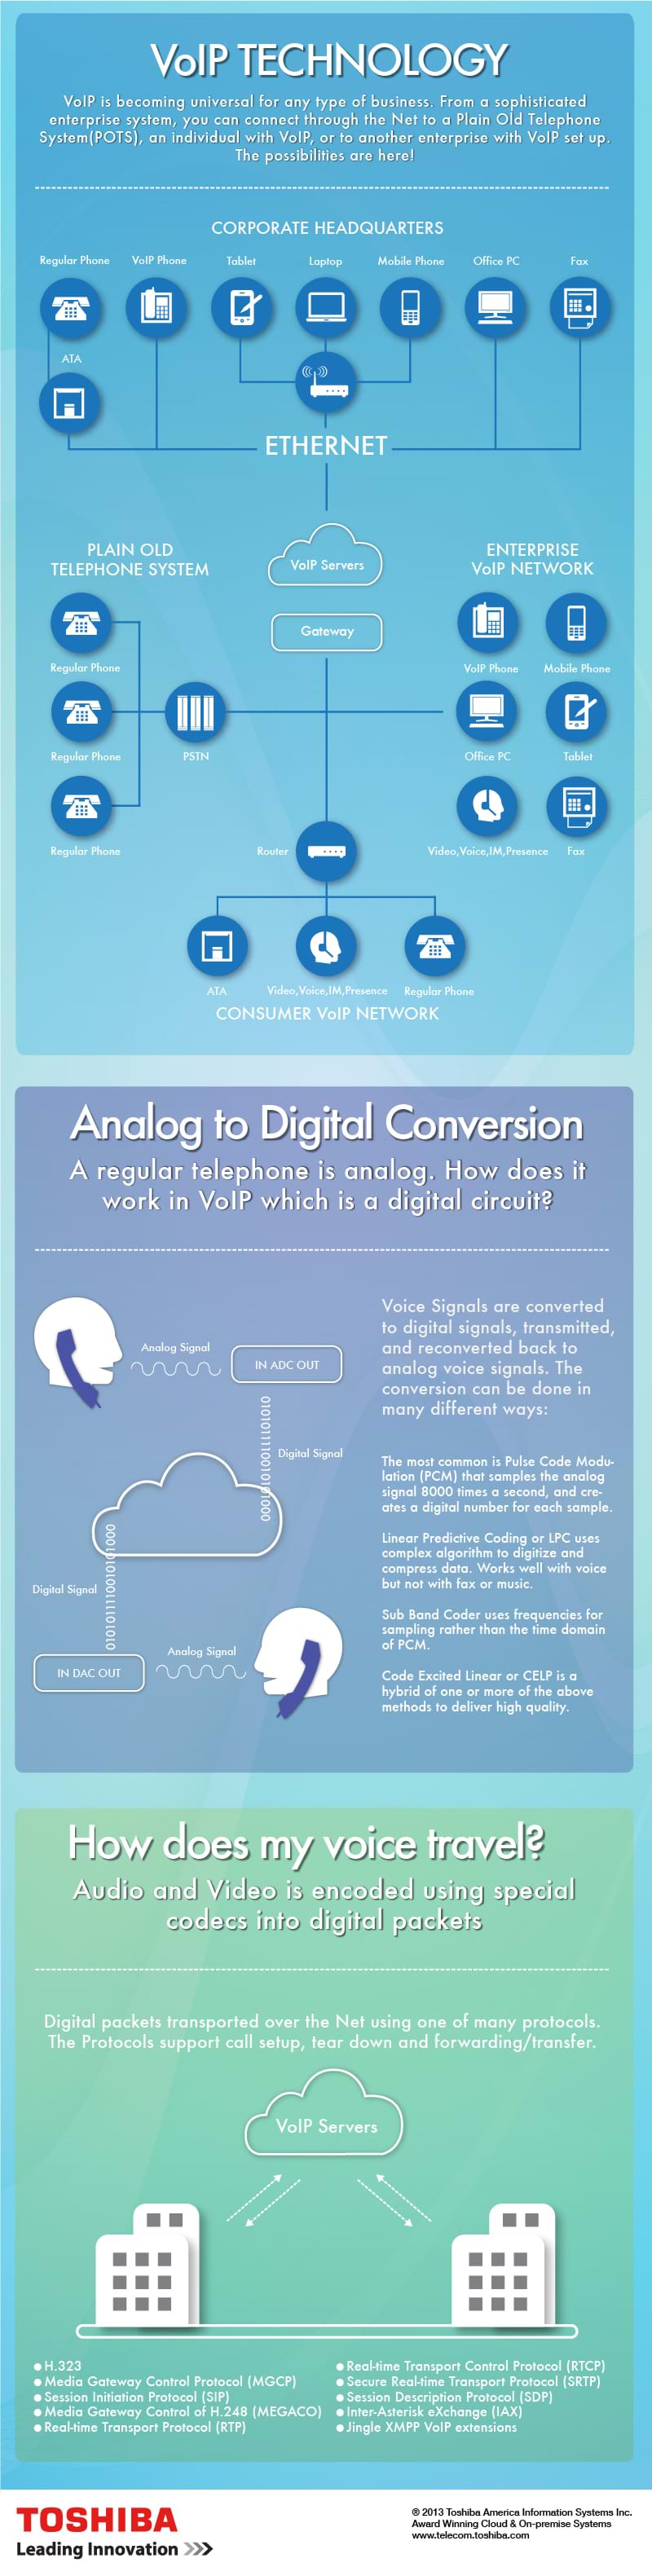 'VoIP is becoming universal for any type of business. From a sophisticated enterprise system, you can connect through the Net to a Plain Old Telephone System (POTS), an individual with VoIP, or to another enterprise with VoIP set up. The possibilities are here!' VoIP Technology Infographic